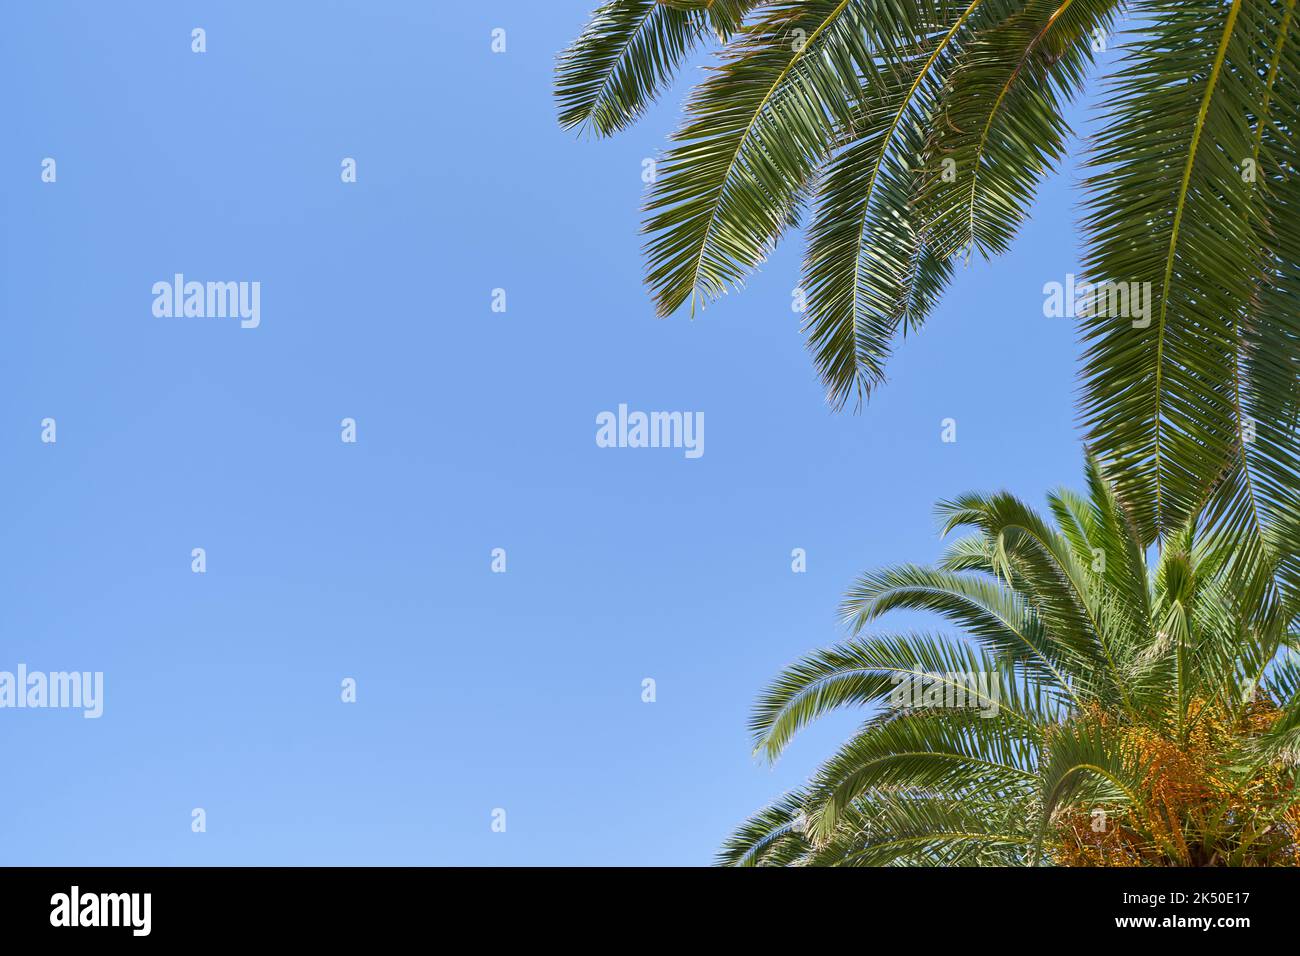 Vivid palm fronds on blue sky with copy space. Stock Photo